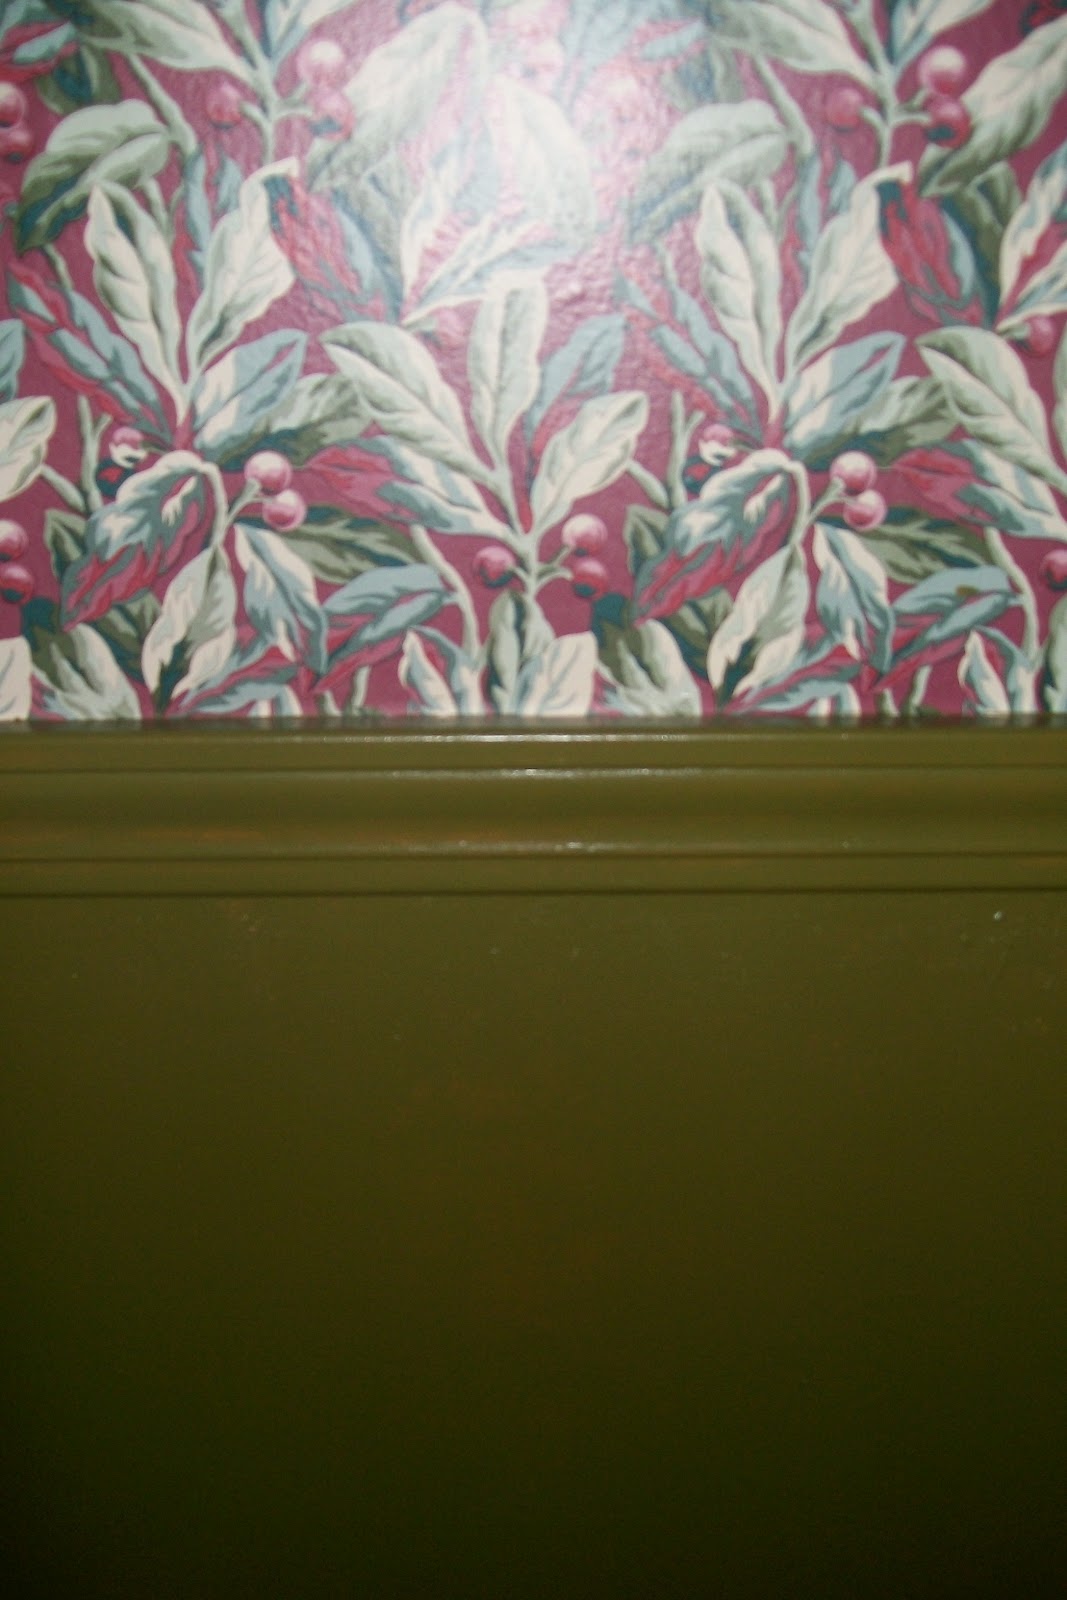 Wallpaper and painted dado rail, together at last.